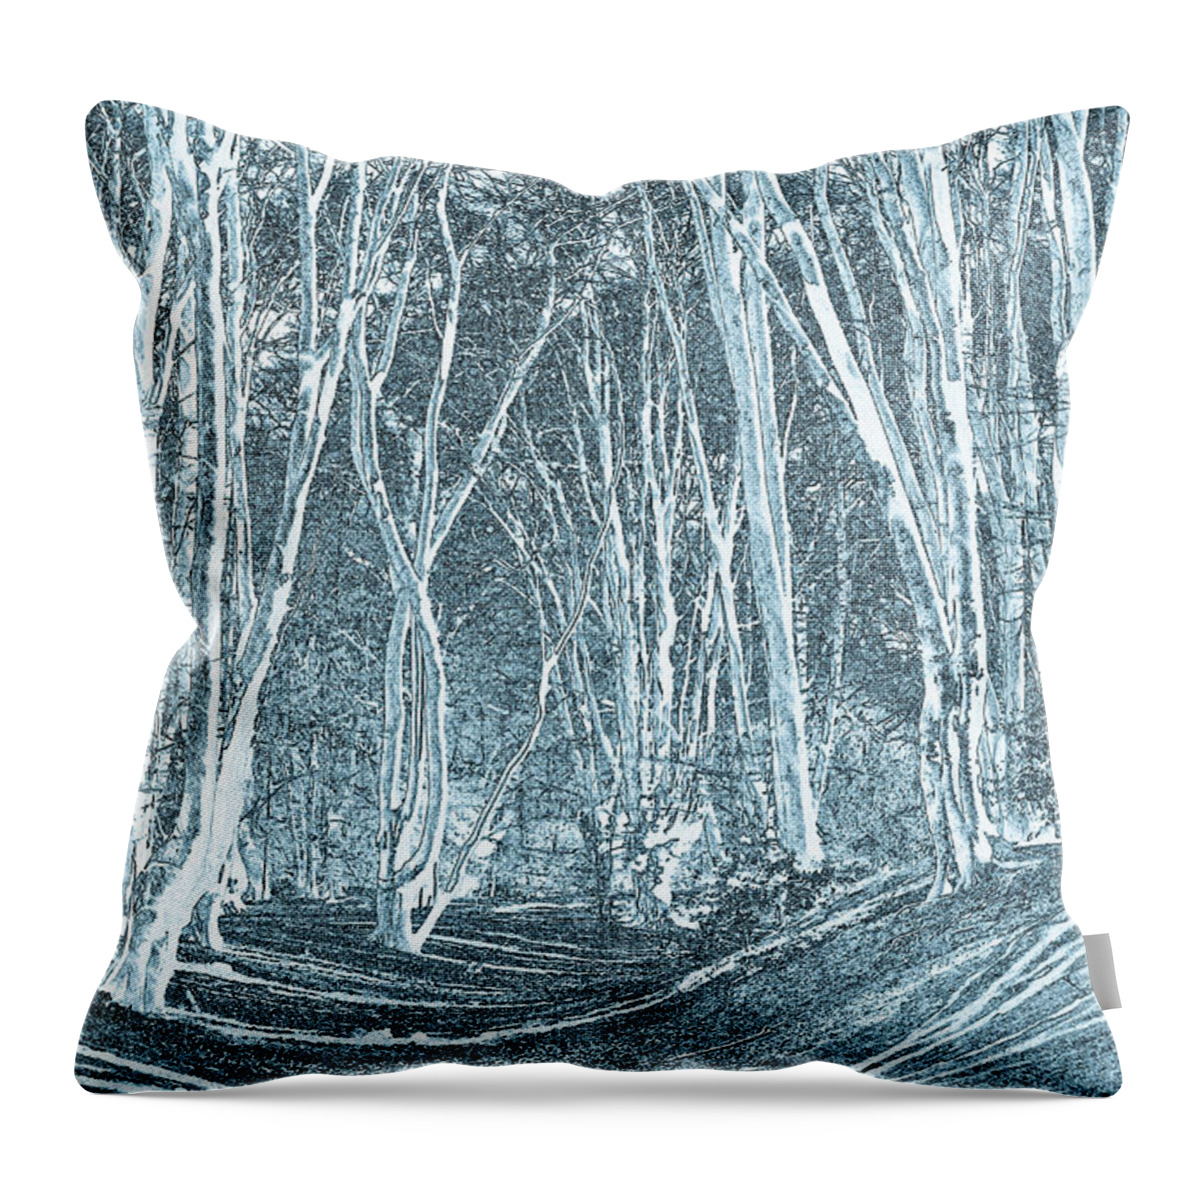 Fort Throw Pillow featuring the digital art Ambresbury Banks Iron Age fortification #2 by David Pyatt